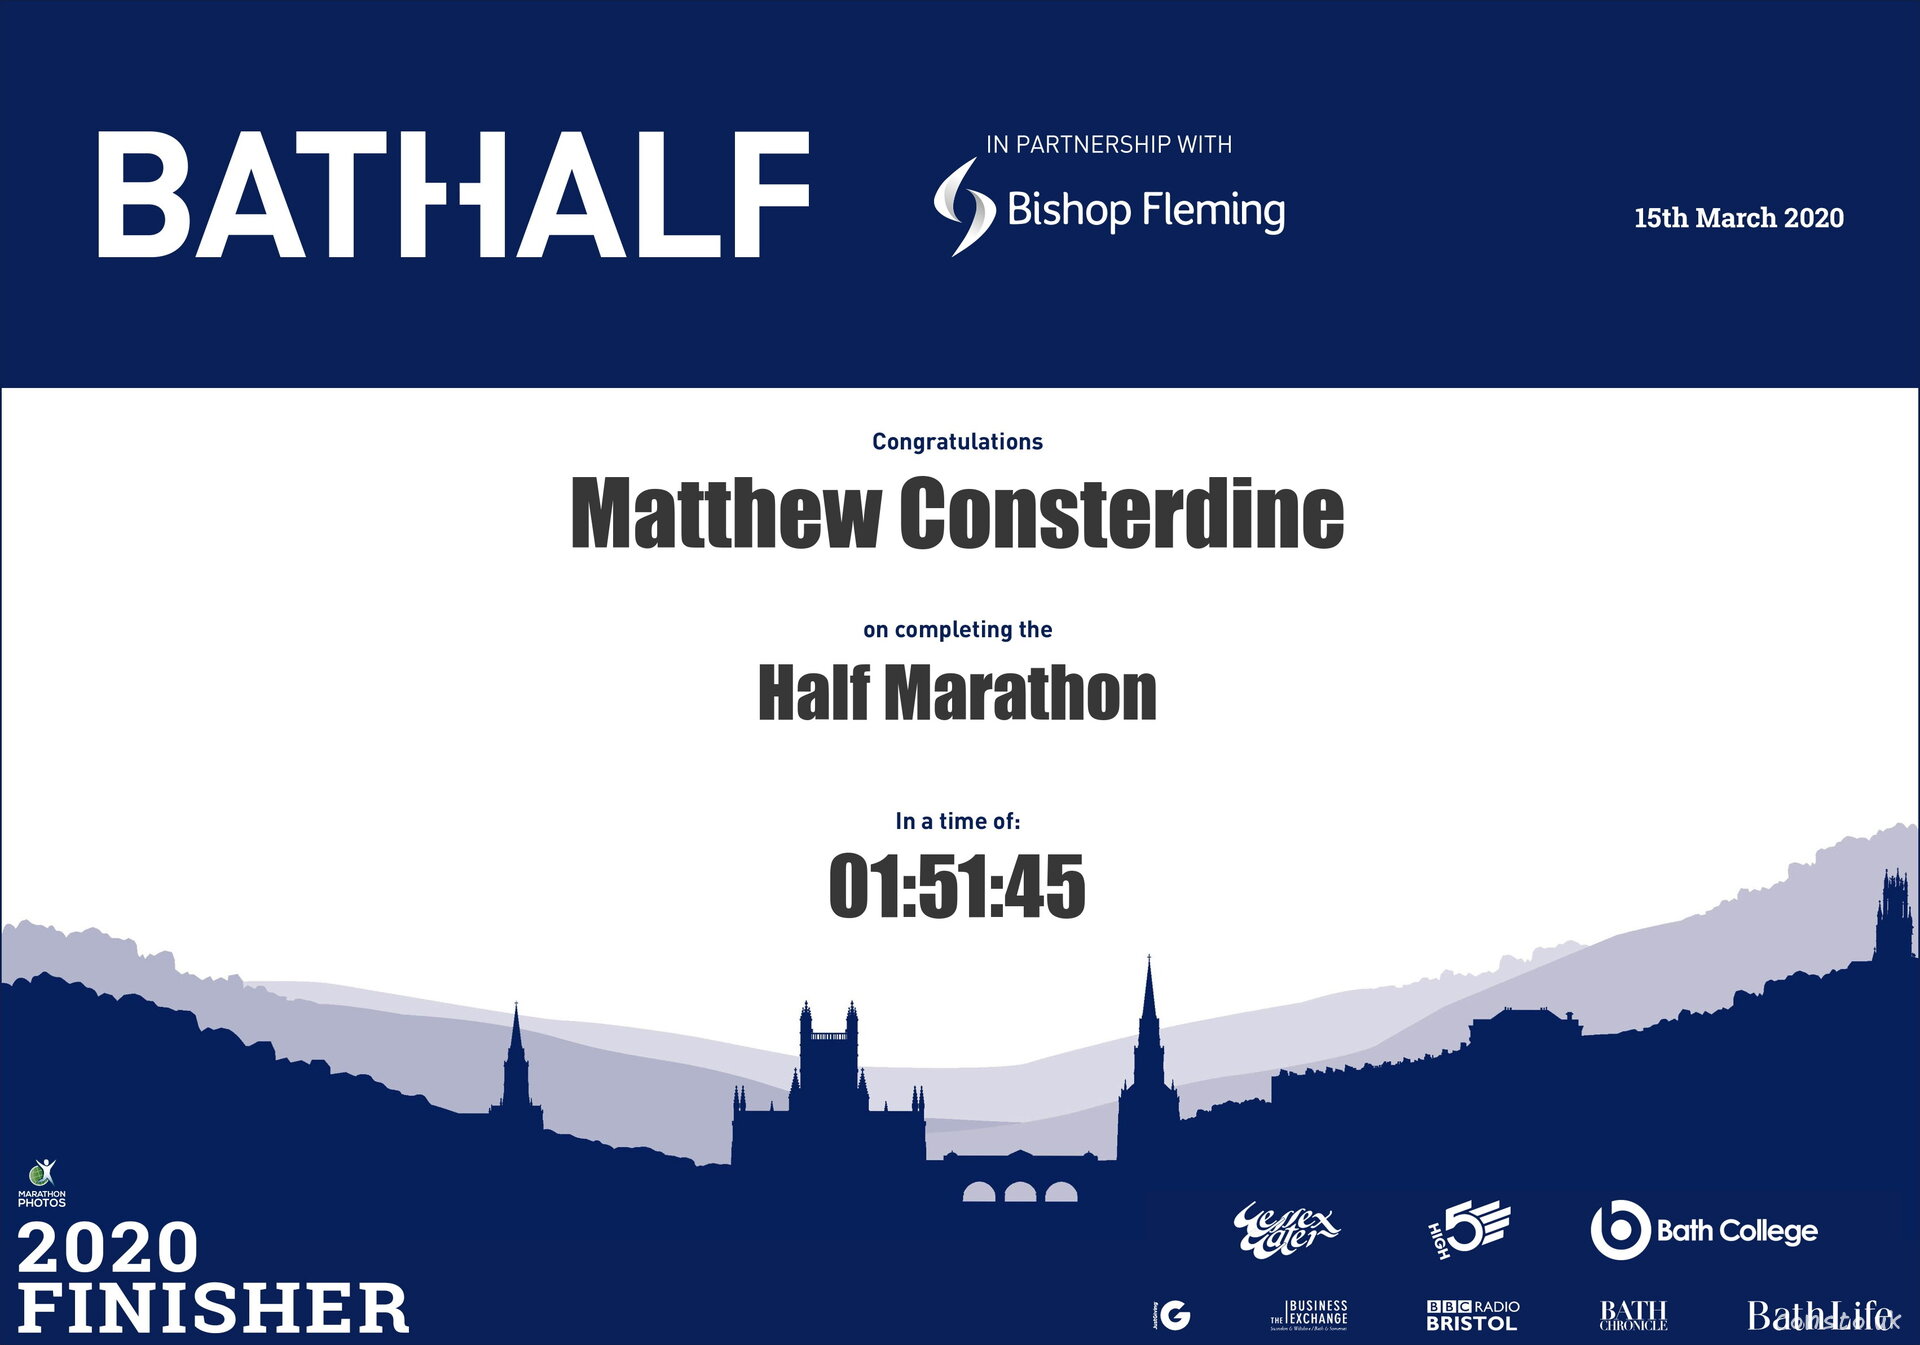 BathHalf, in partnership with Bishop Fleming: 15th March 2020. Congratulations Matthew Consterdine on completing the Half Marathon in a time of 01:51:45. 2020 Finisher.